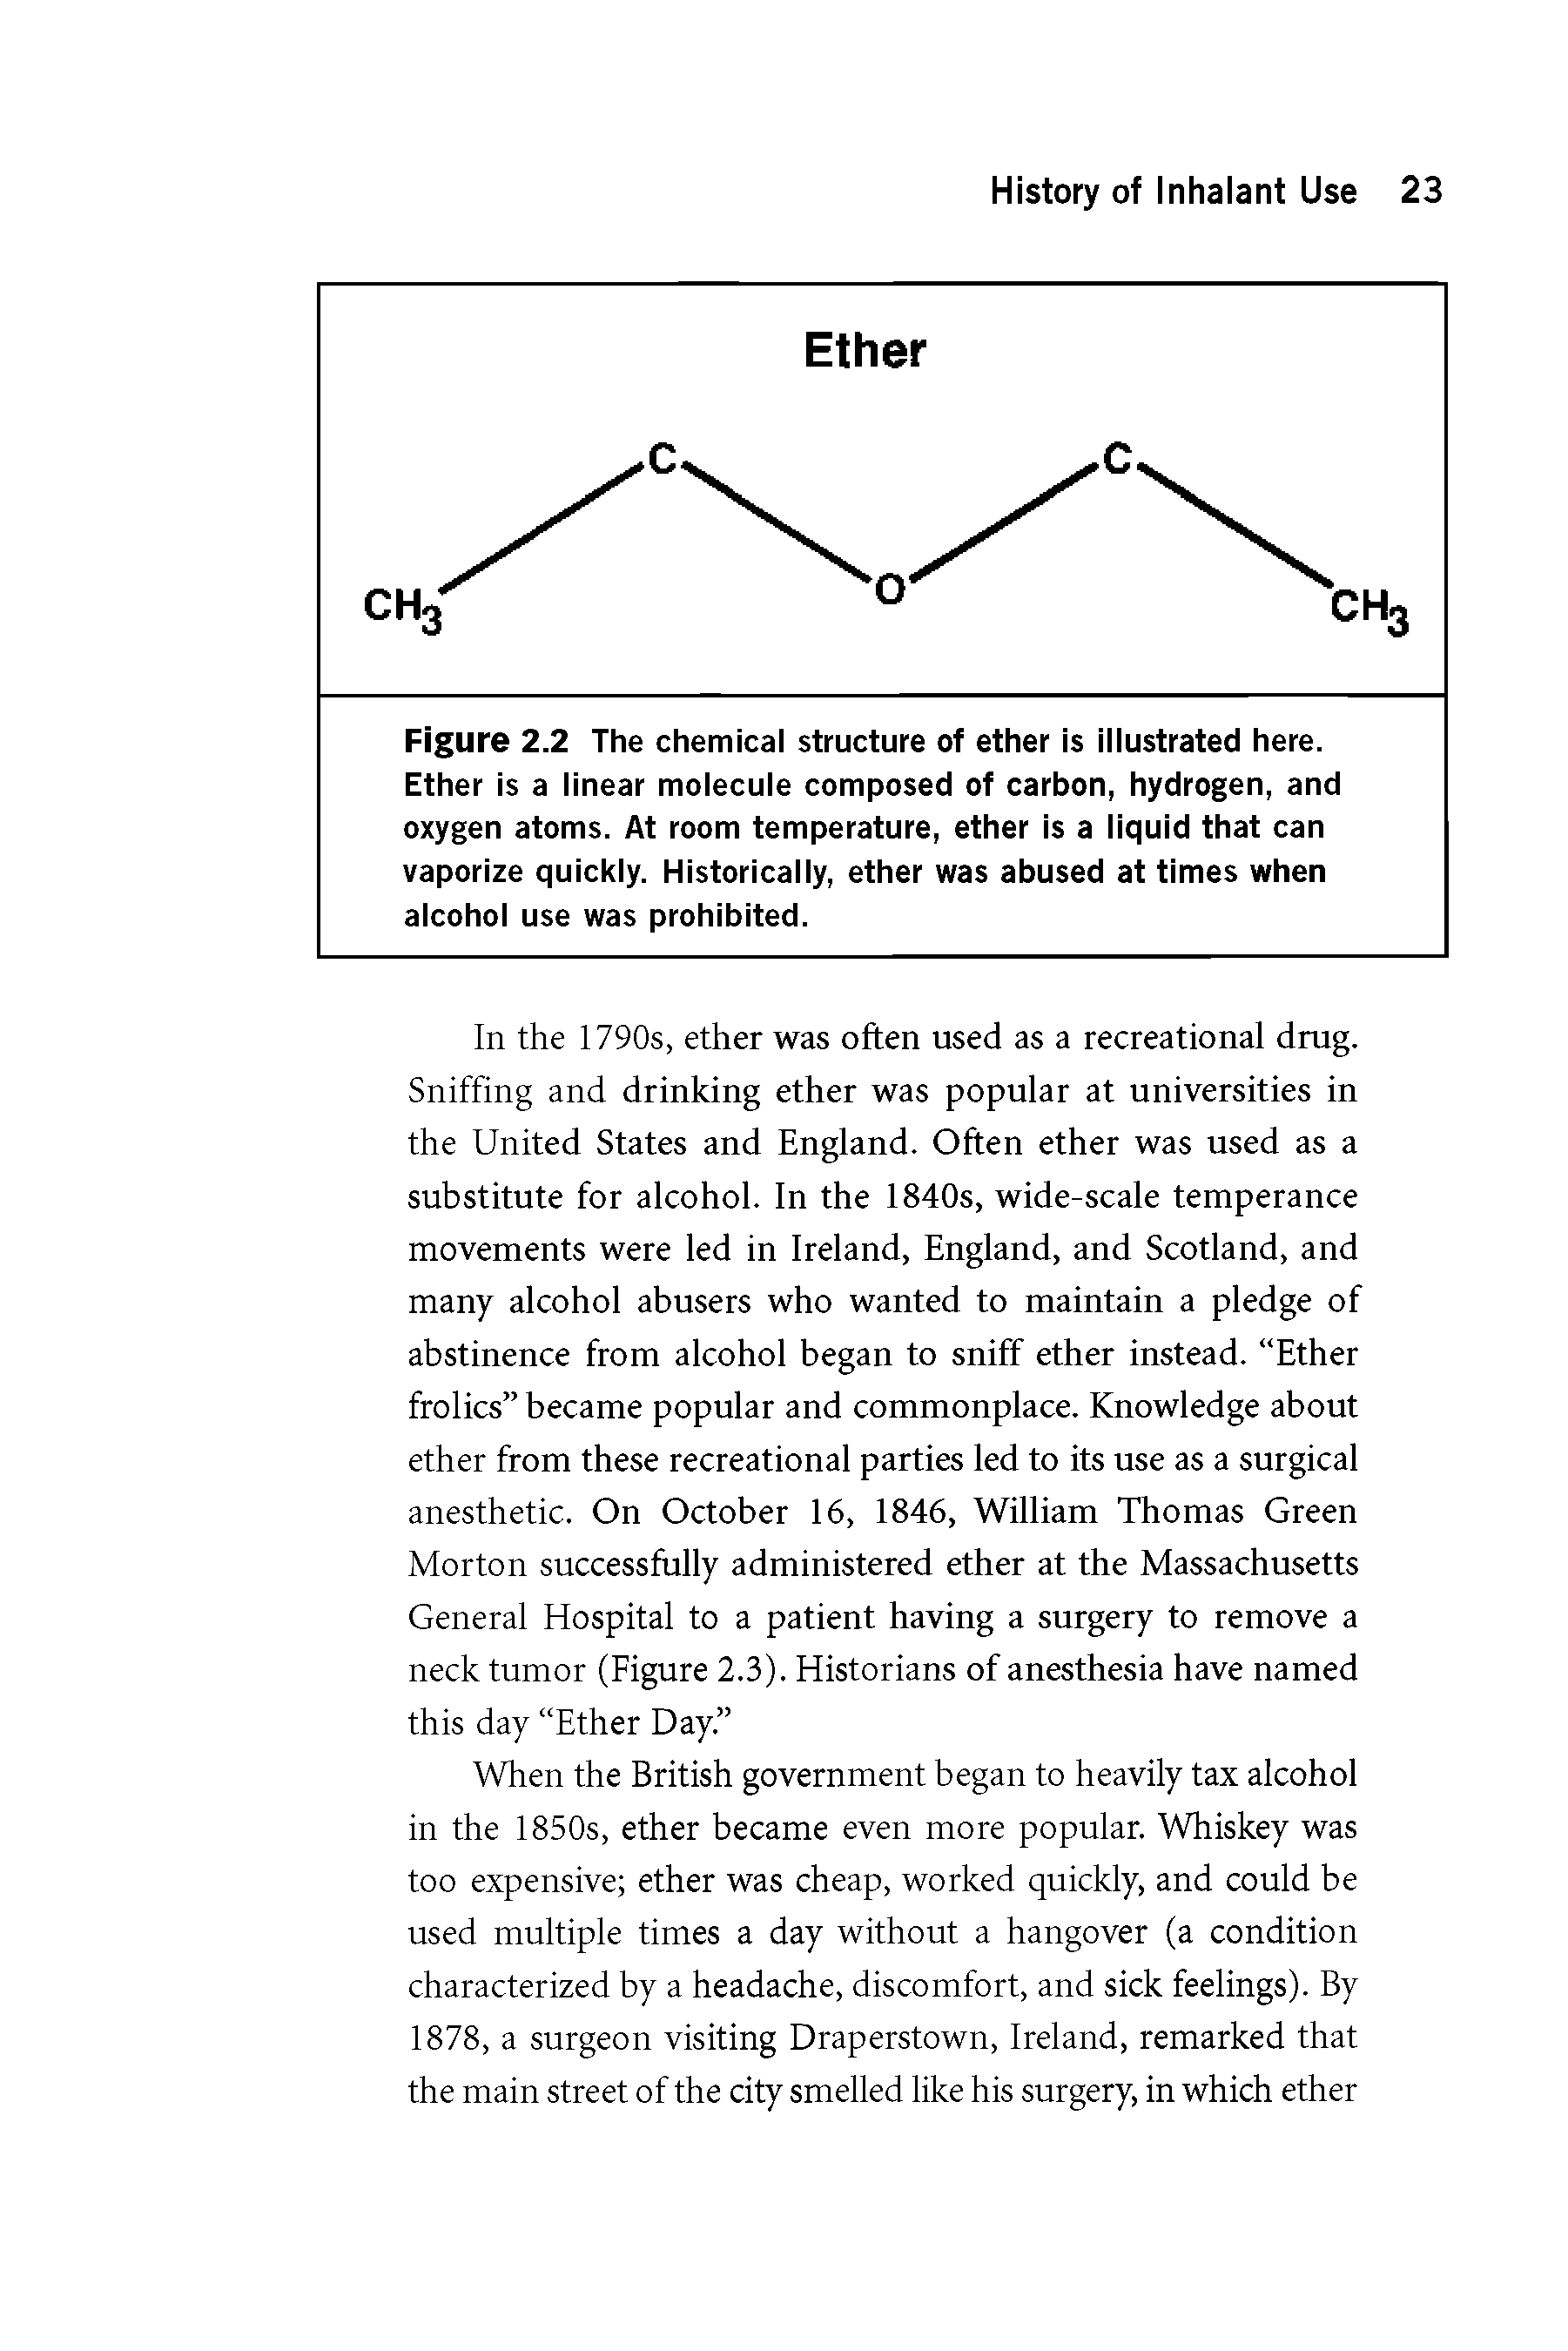 Figure 2.2 The chemical structure of ether is illustrated here. Ether is a linear molecule composed of carbon, hydrogen, and oxygen atoms. At room temperature, ether is a liquid that can vaporize quickly. Historically, ether was abused at times when alcohol use was prohibited.